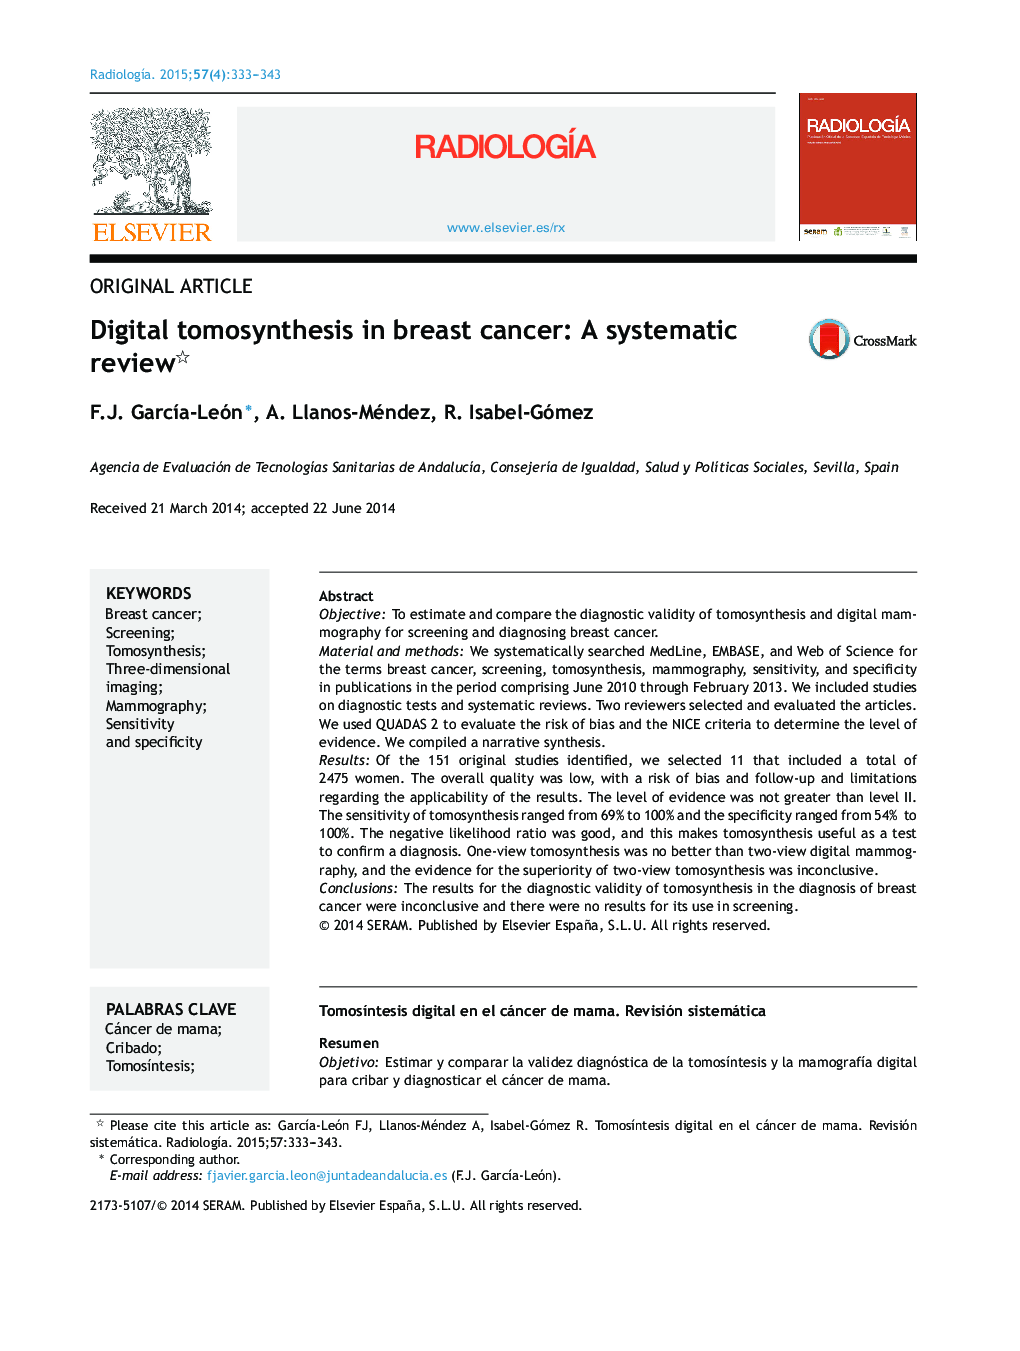 Digital tomosynthesis in breast cancer: A systematic review 